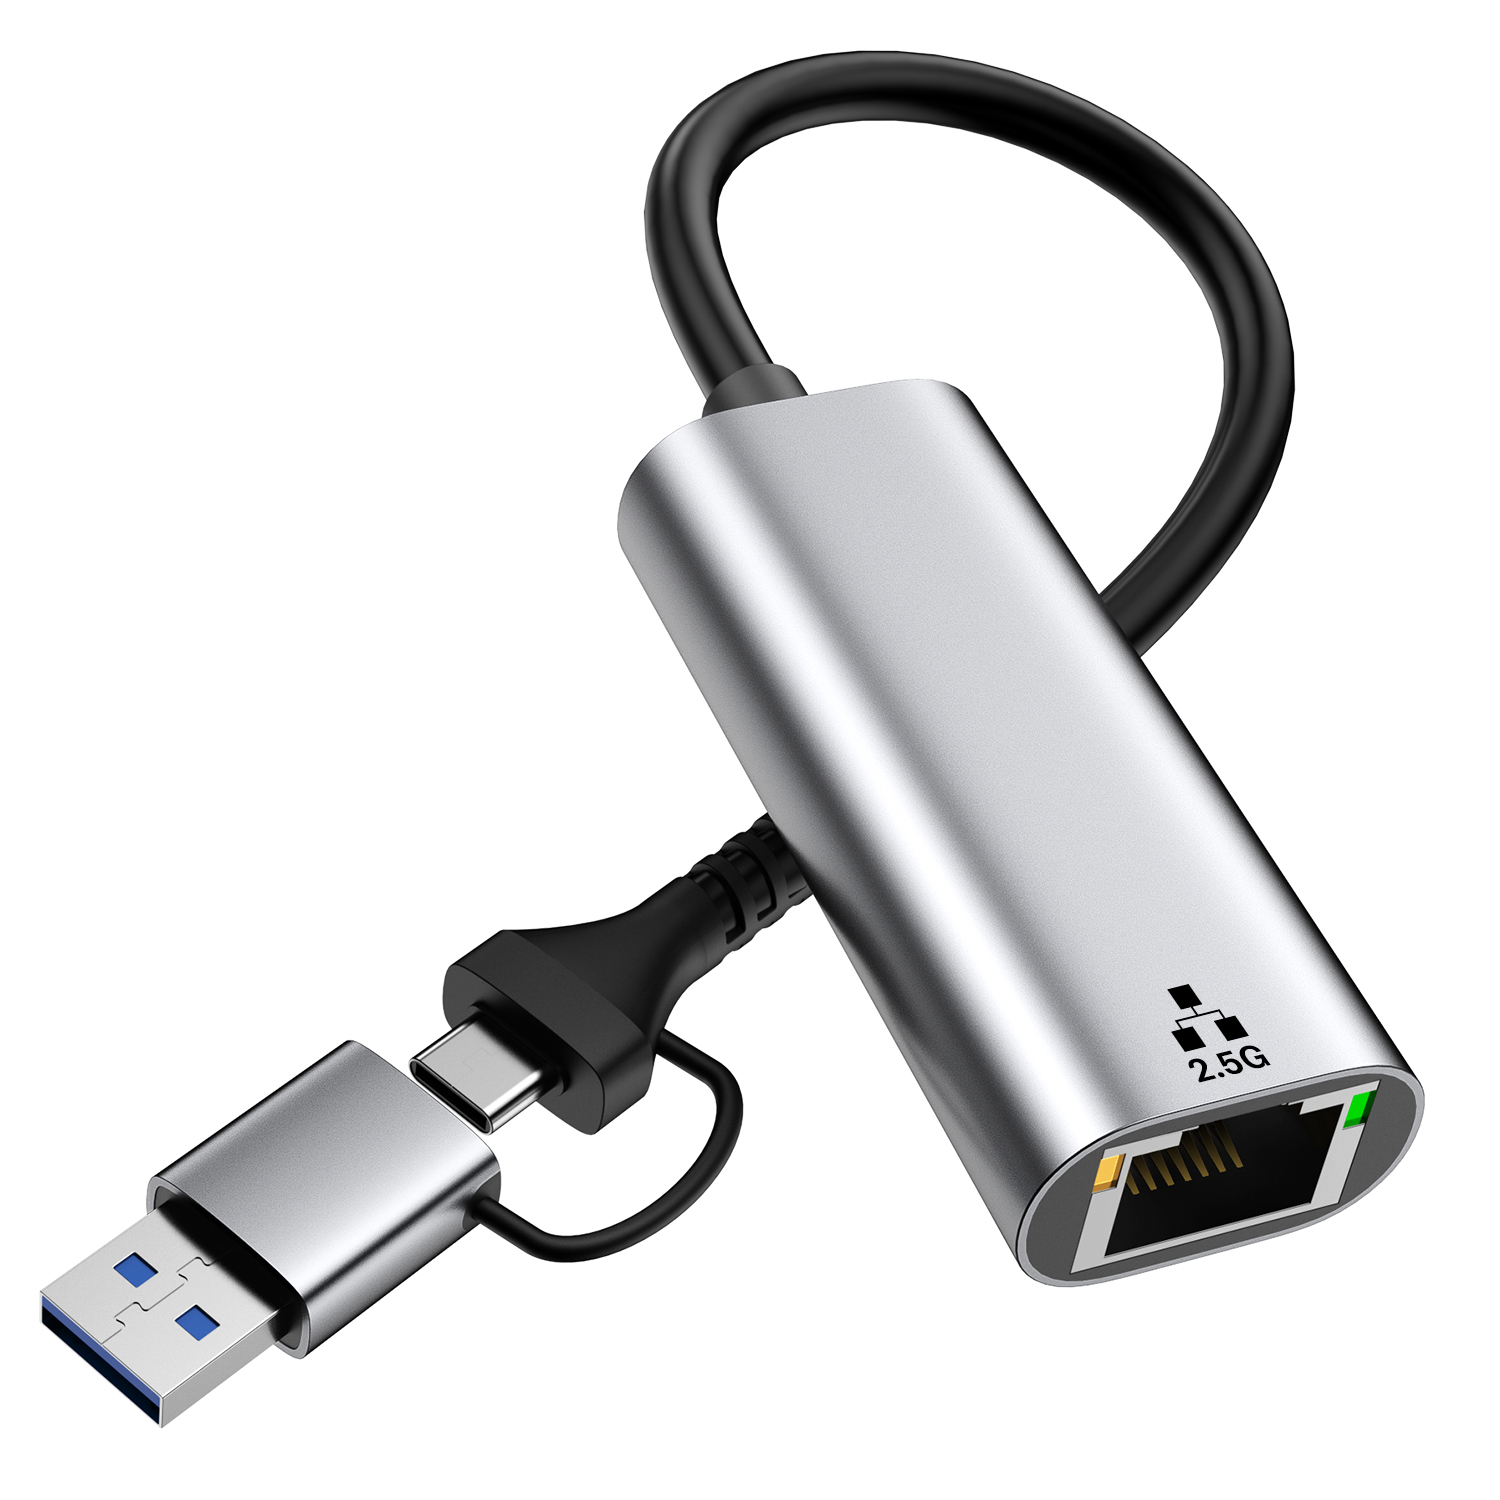 2in1 USB 3.0 TO 2.5G Ethernet Adapter